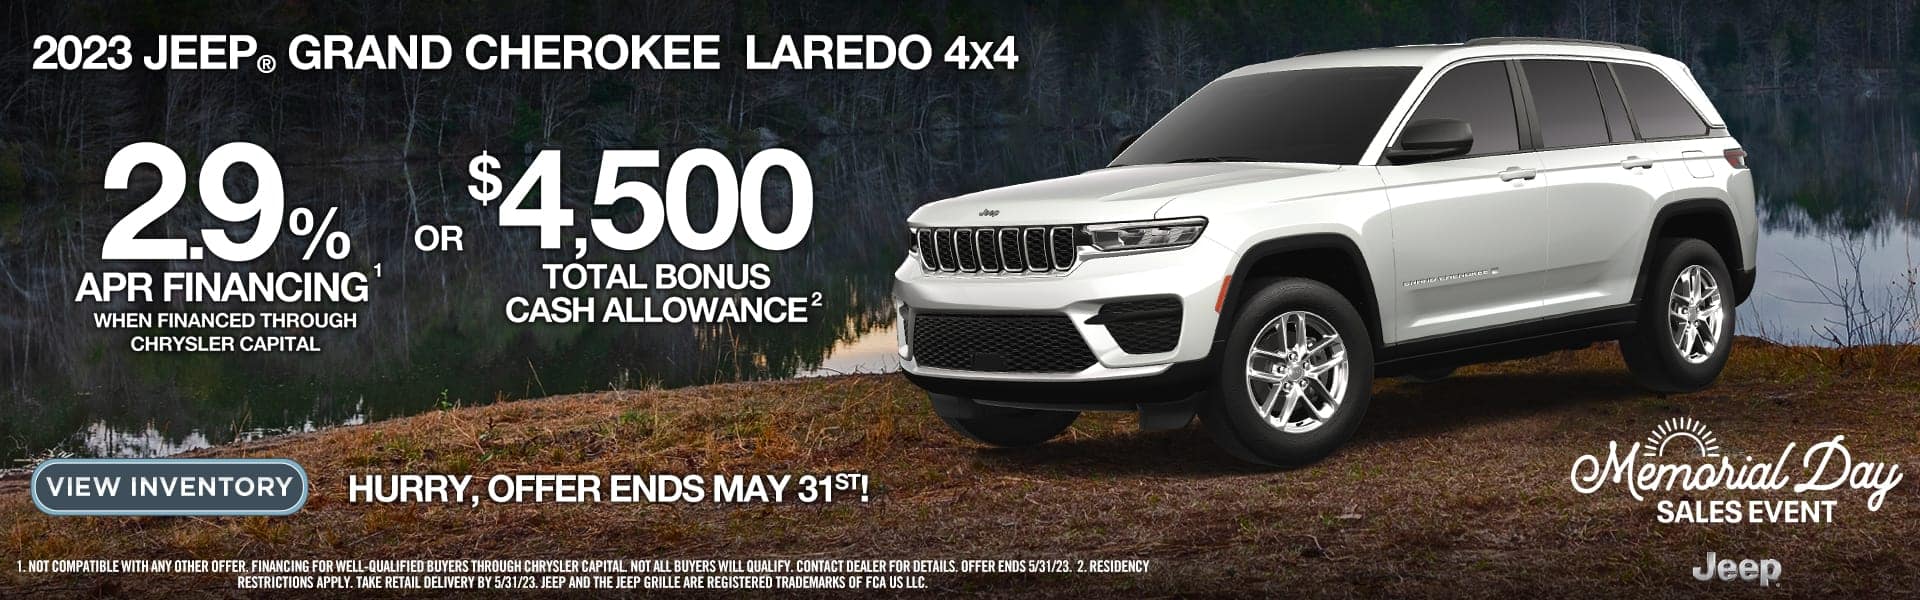 2023 Jeep Grand Cherokee offer